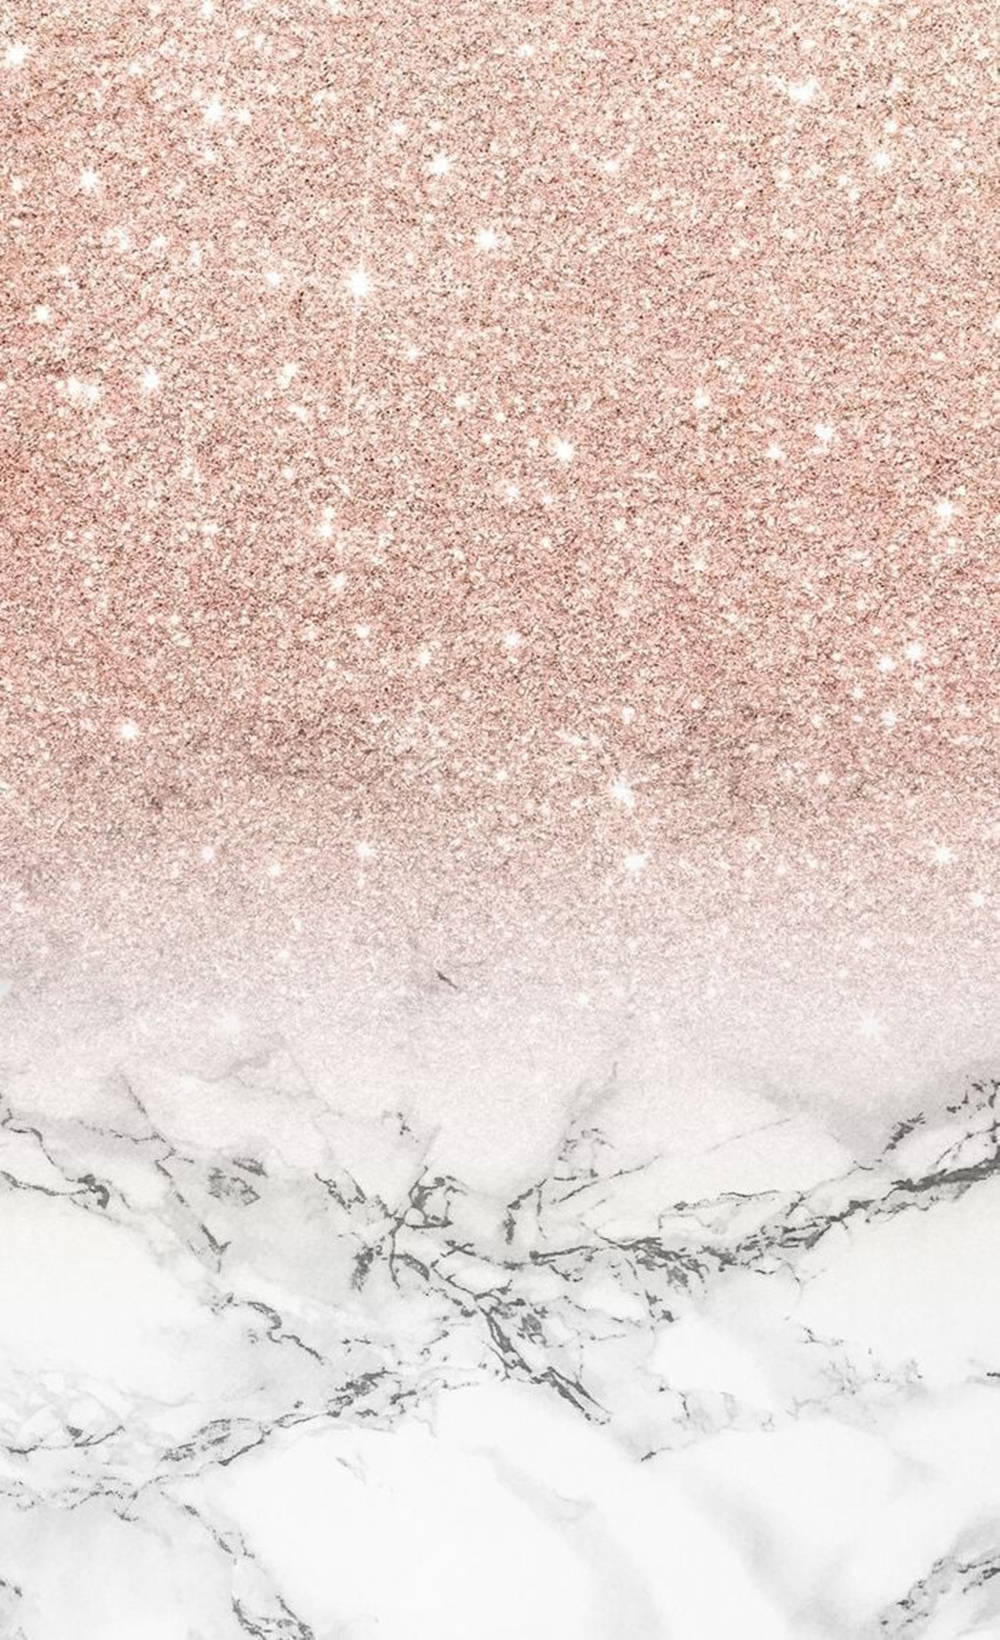 Rose Gold Ipad Glitters And Marble Wallpaper